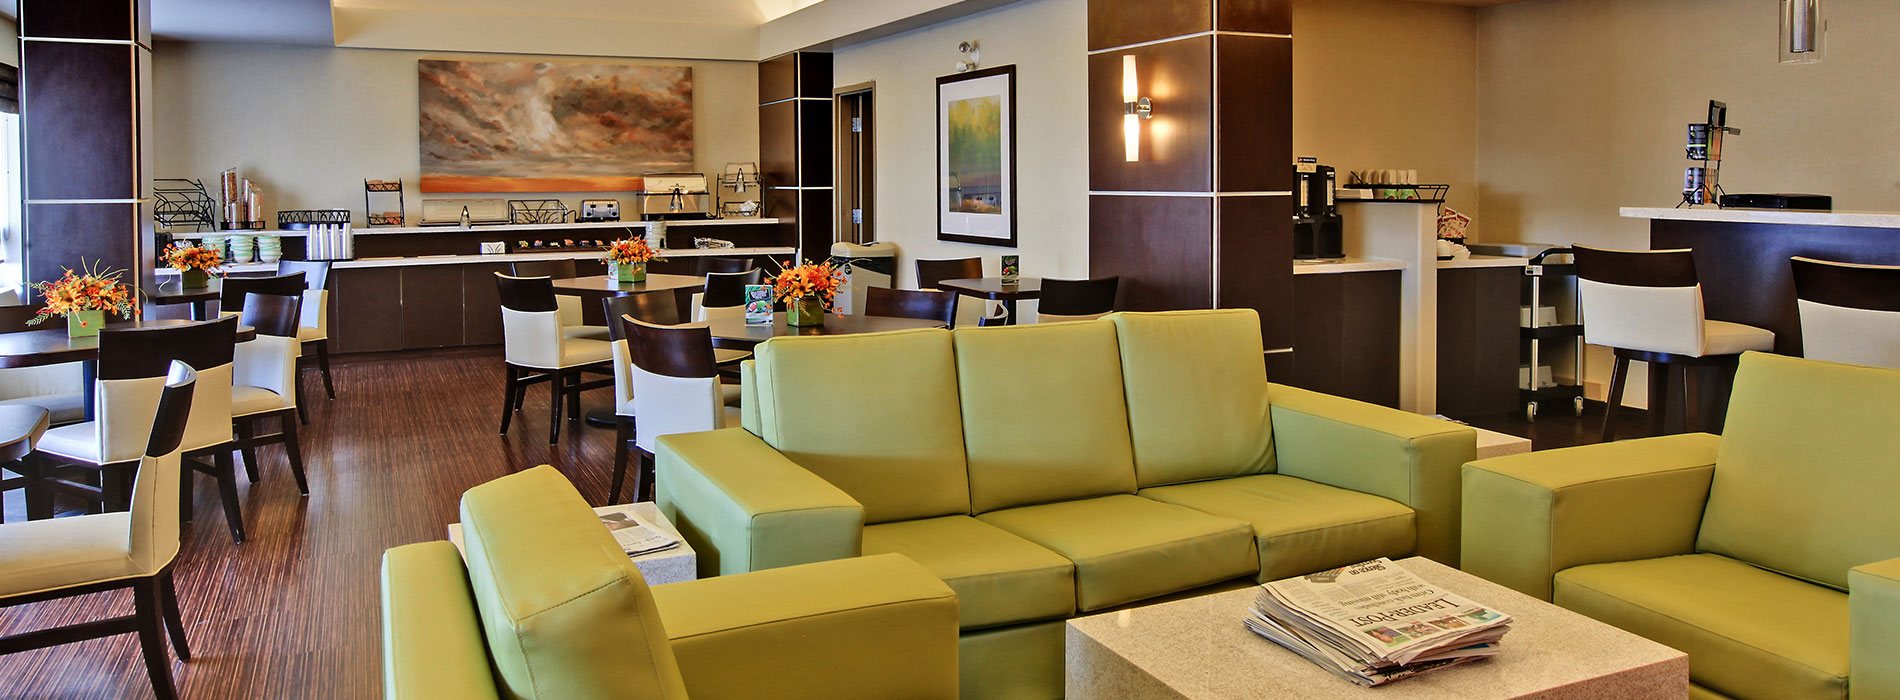 The breakfast and sitting space at d3h Home Inn & Suites Yorkton features wood grain chestnut brown hardwood floors and a long two tiered breakfast counter stocked with dining ware and stainless steel appliances.  Square eating tables and upholstered dining chairs are placed throughout the breakfasting area.  In the sitting area, modern cube shaped coffee and end tables flank a chartreuse green vinyl sofa and armchair set.